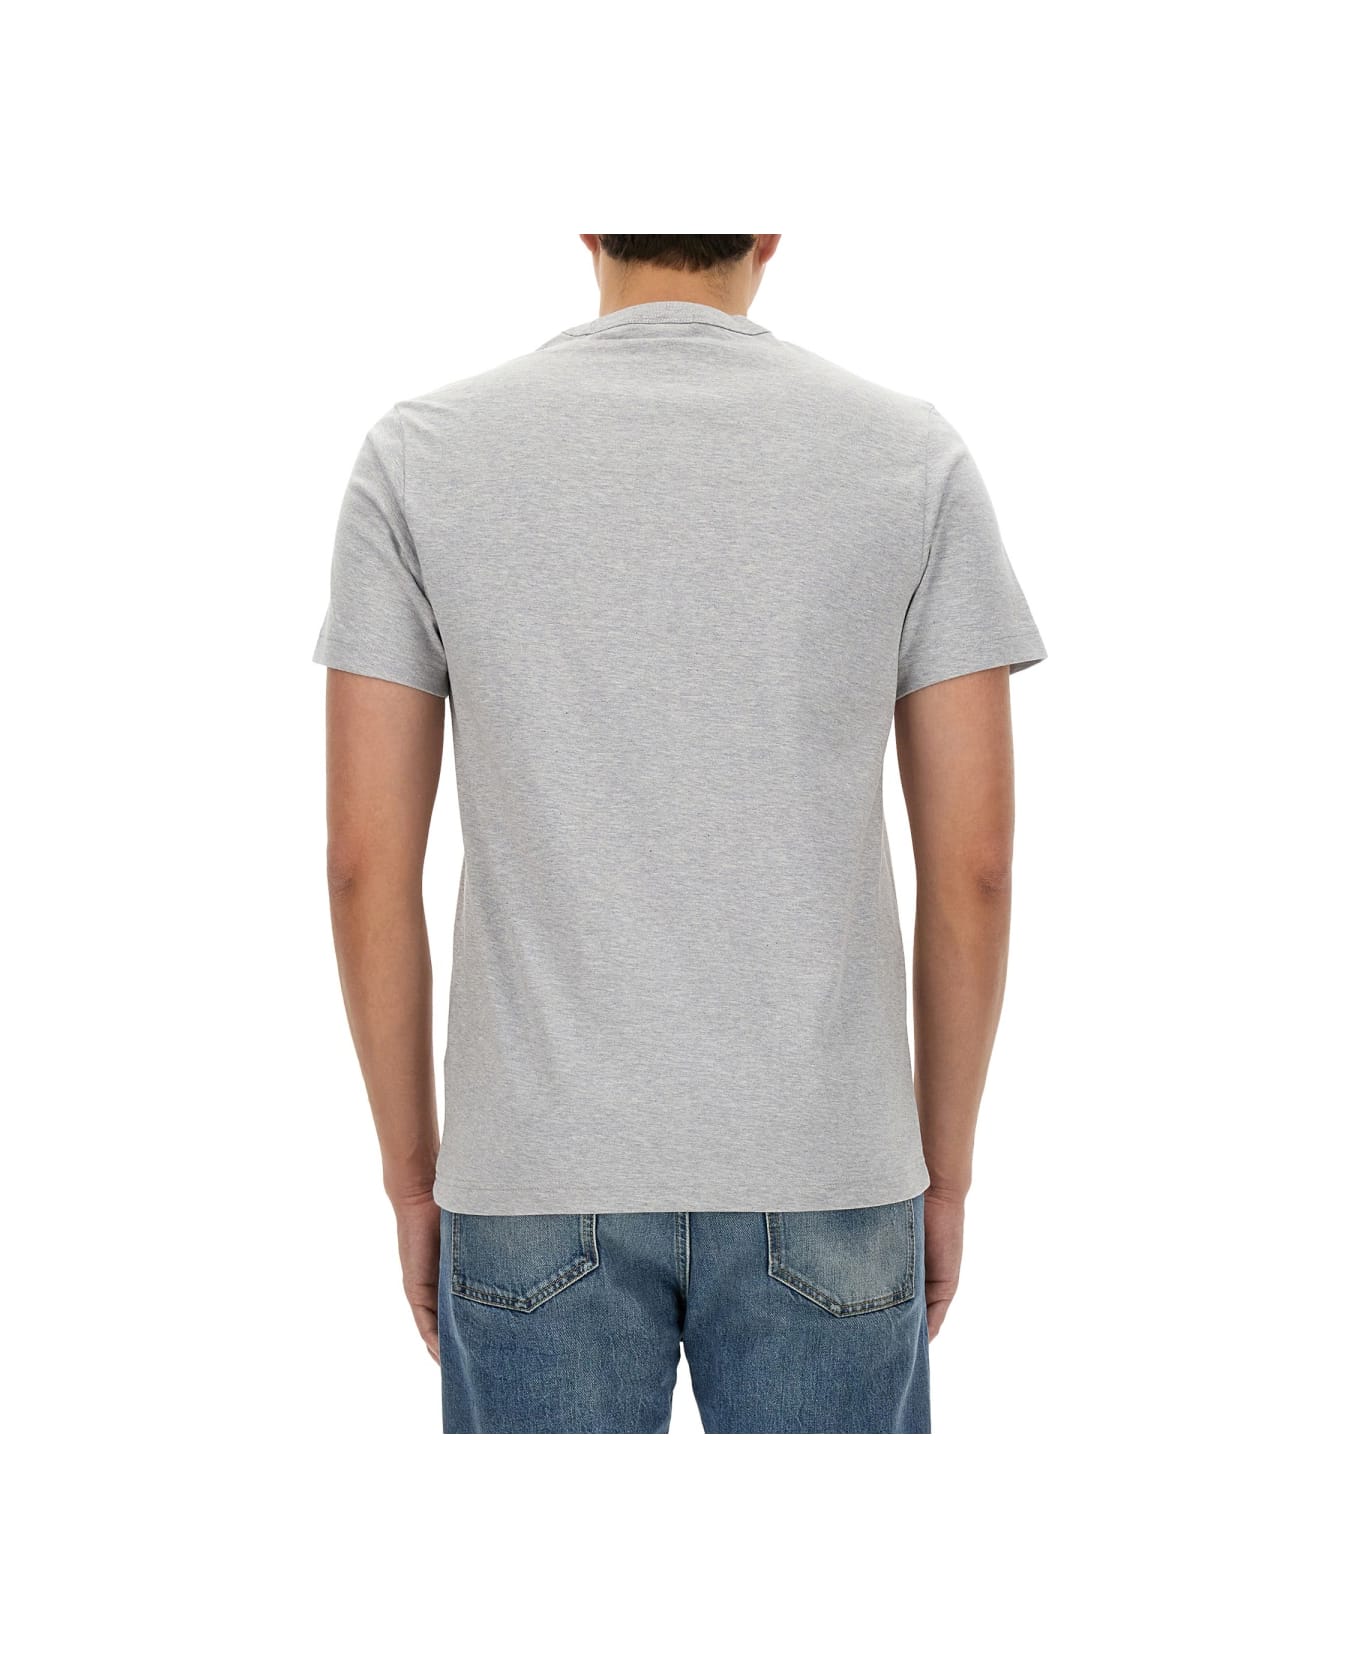 Lacoste T-shirt With Print - GREY シャツ